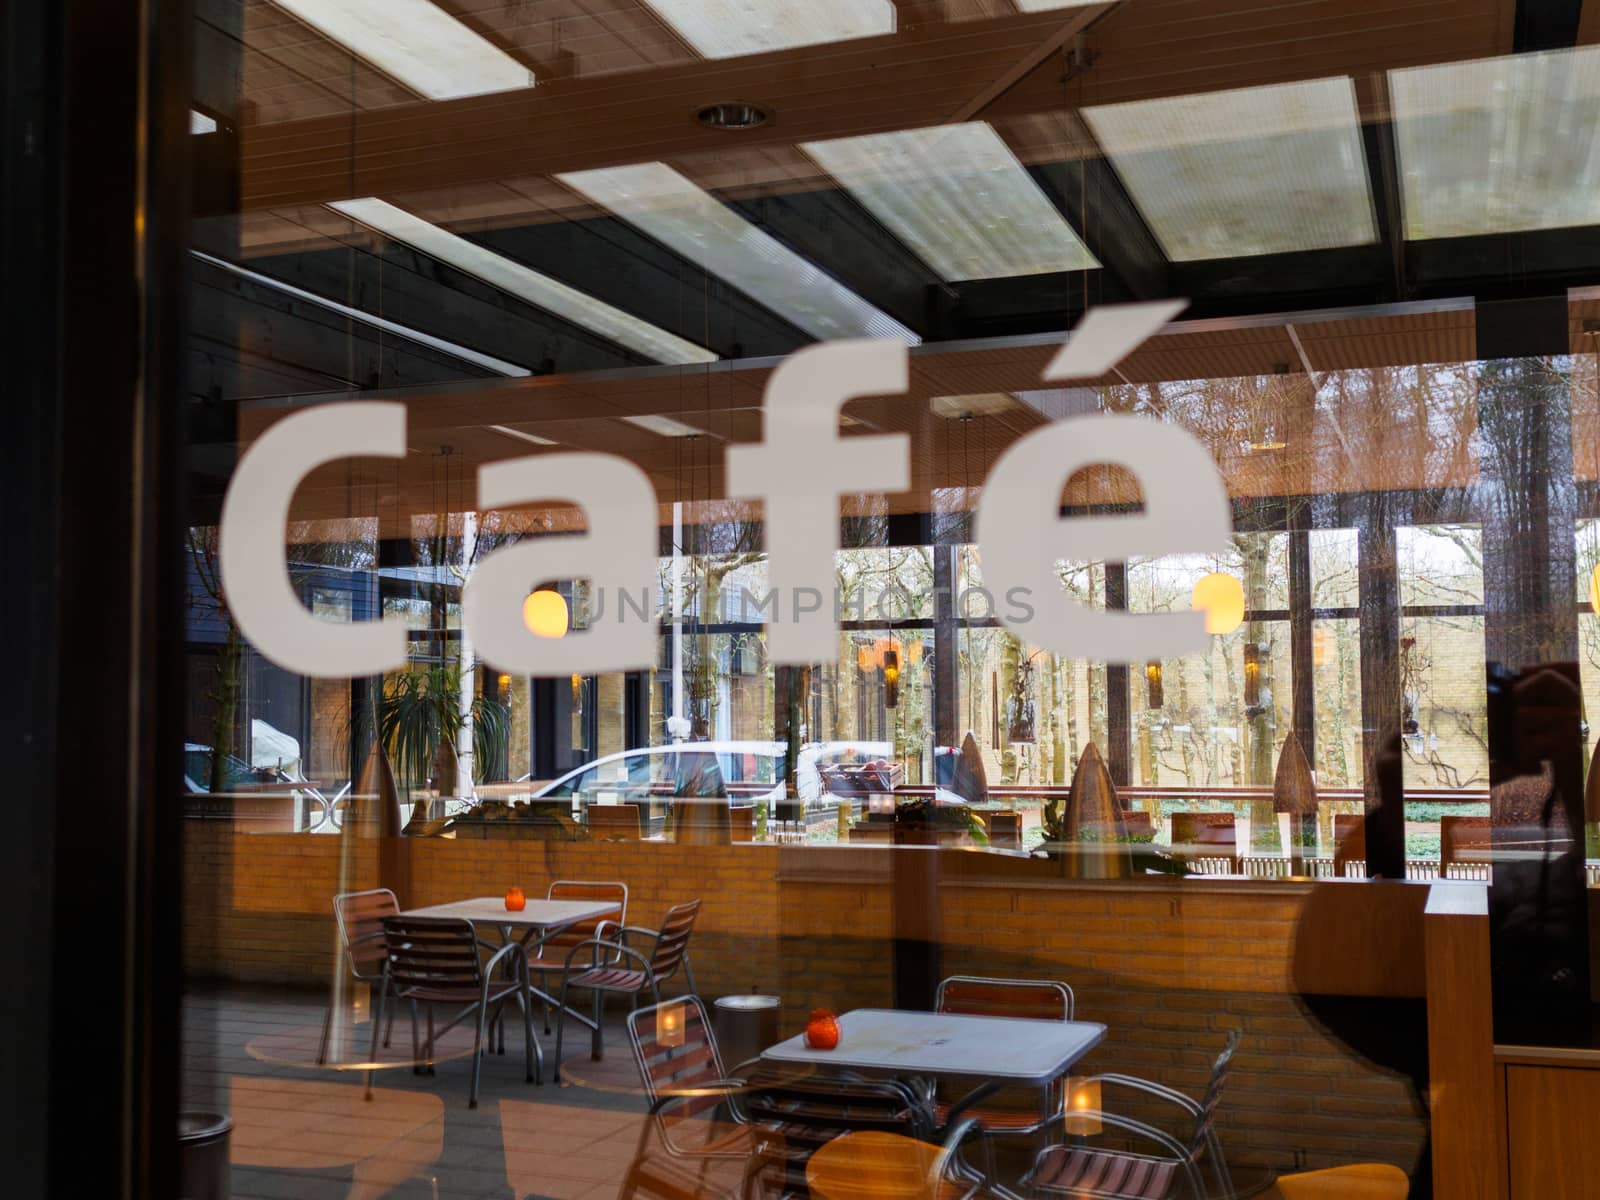 Modern Classical Design Coffee Shop Cafe Restaurant Blurred Sign on Glass Window